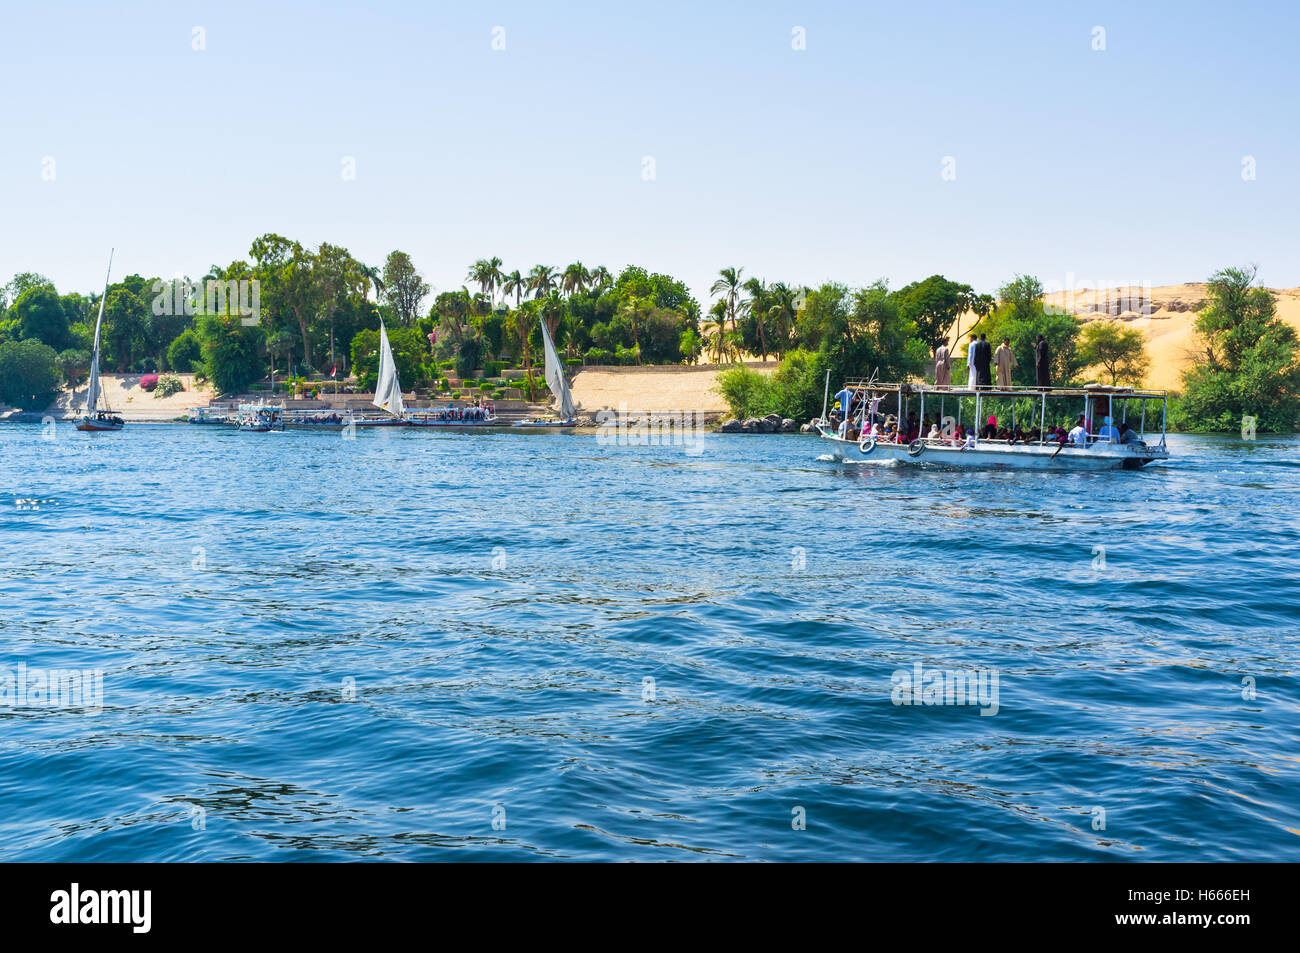 Many tourist boats and feluccas sail to the Kitchener's island with the famous Botanical garden, Aswan, Egypt. Stock Photo